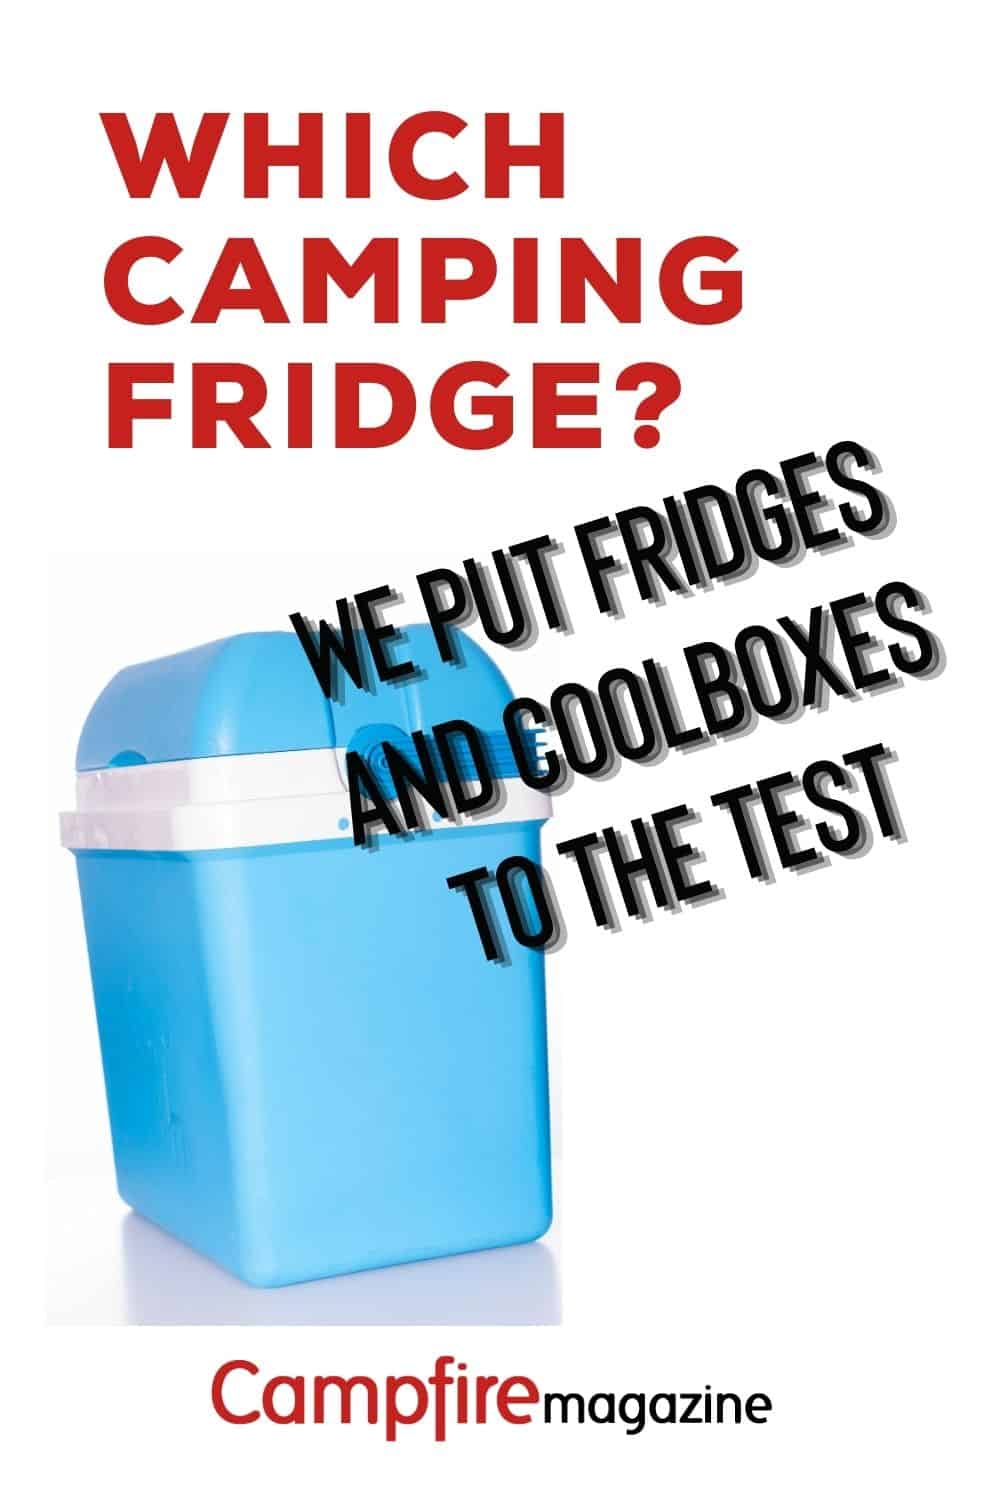 Best Camping Fridges And Coolbox – Our Fridge & Coolboxes Guide